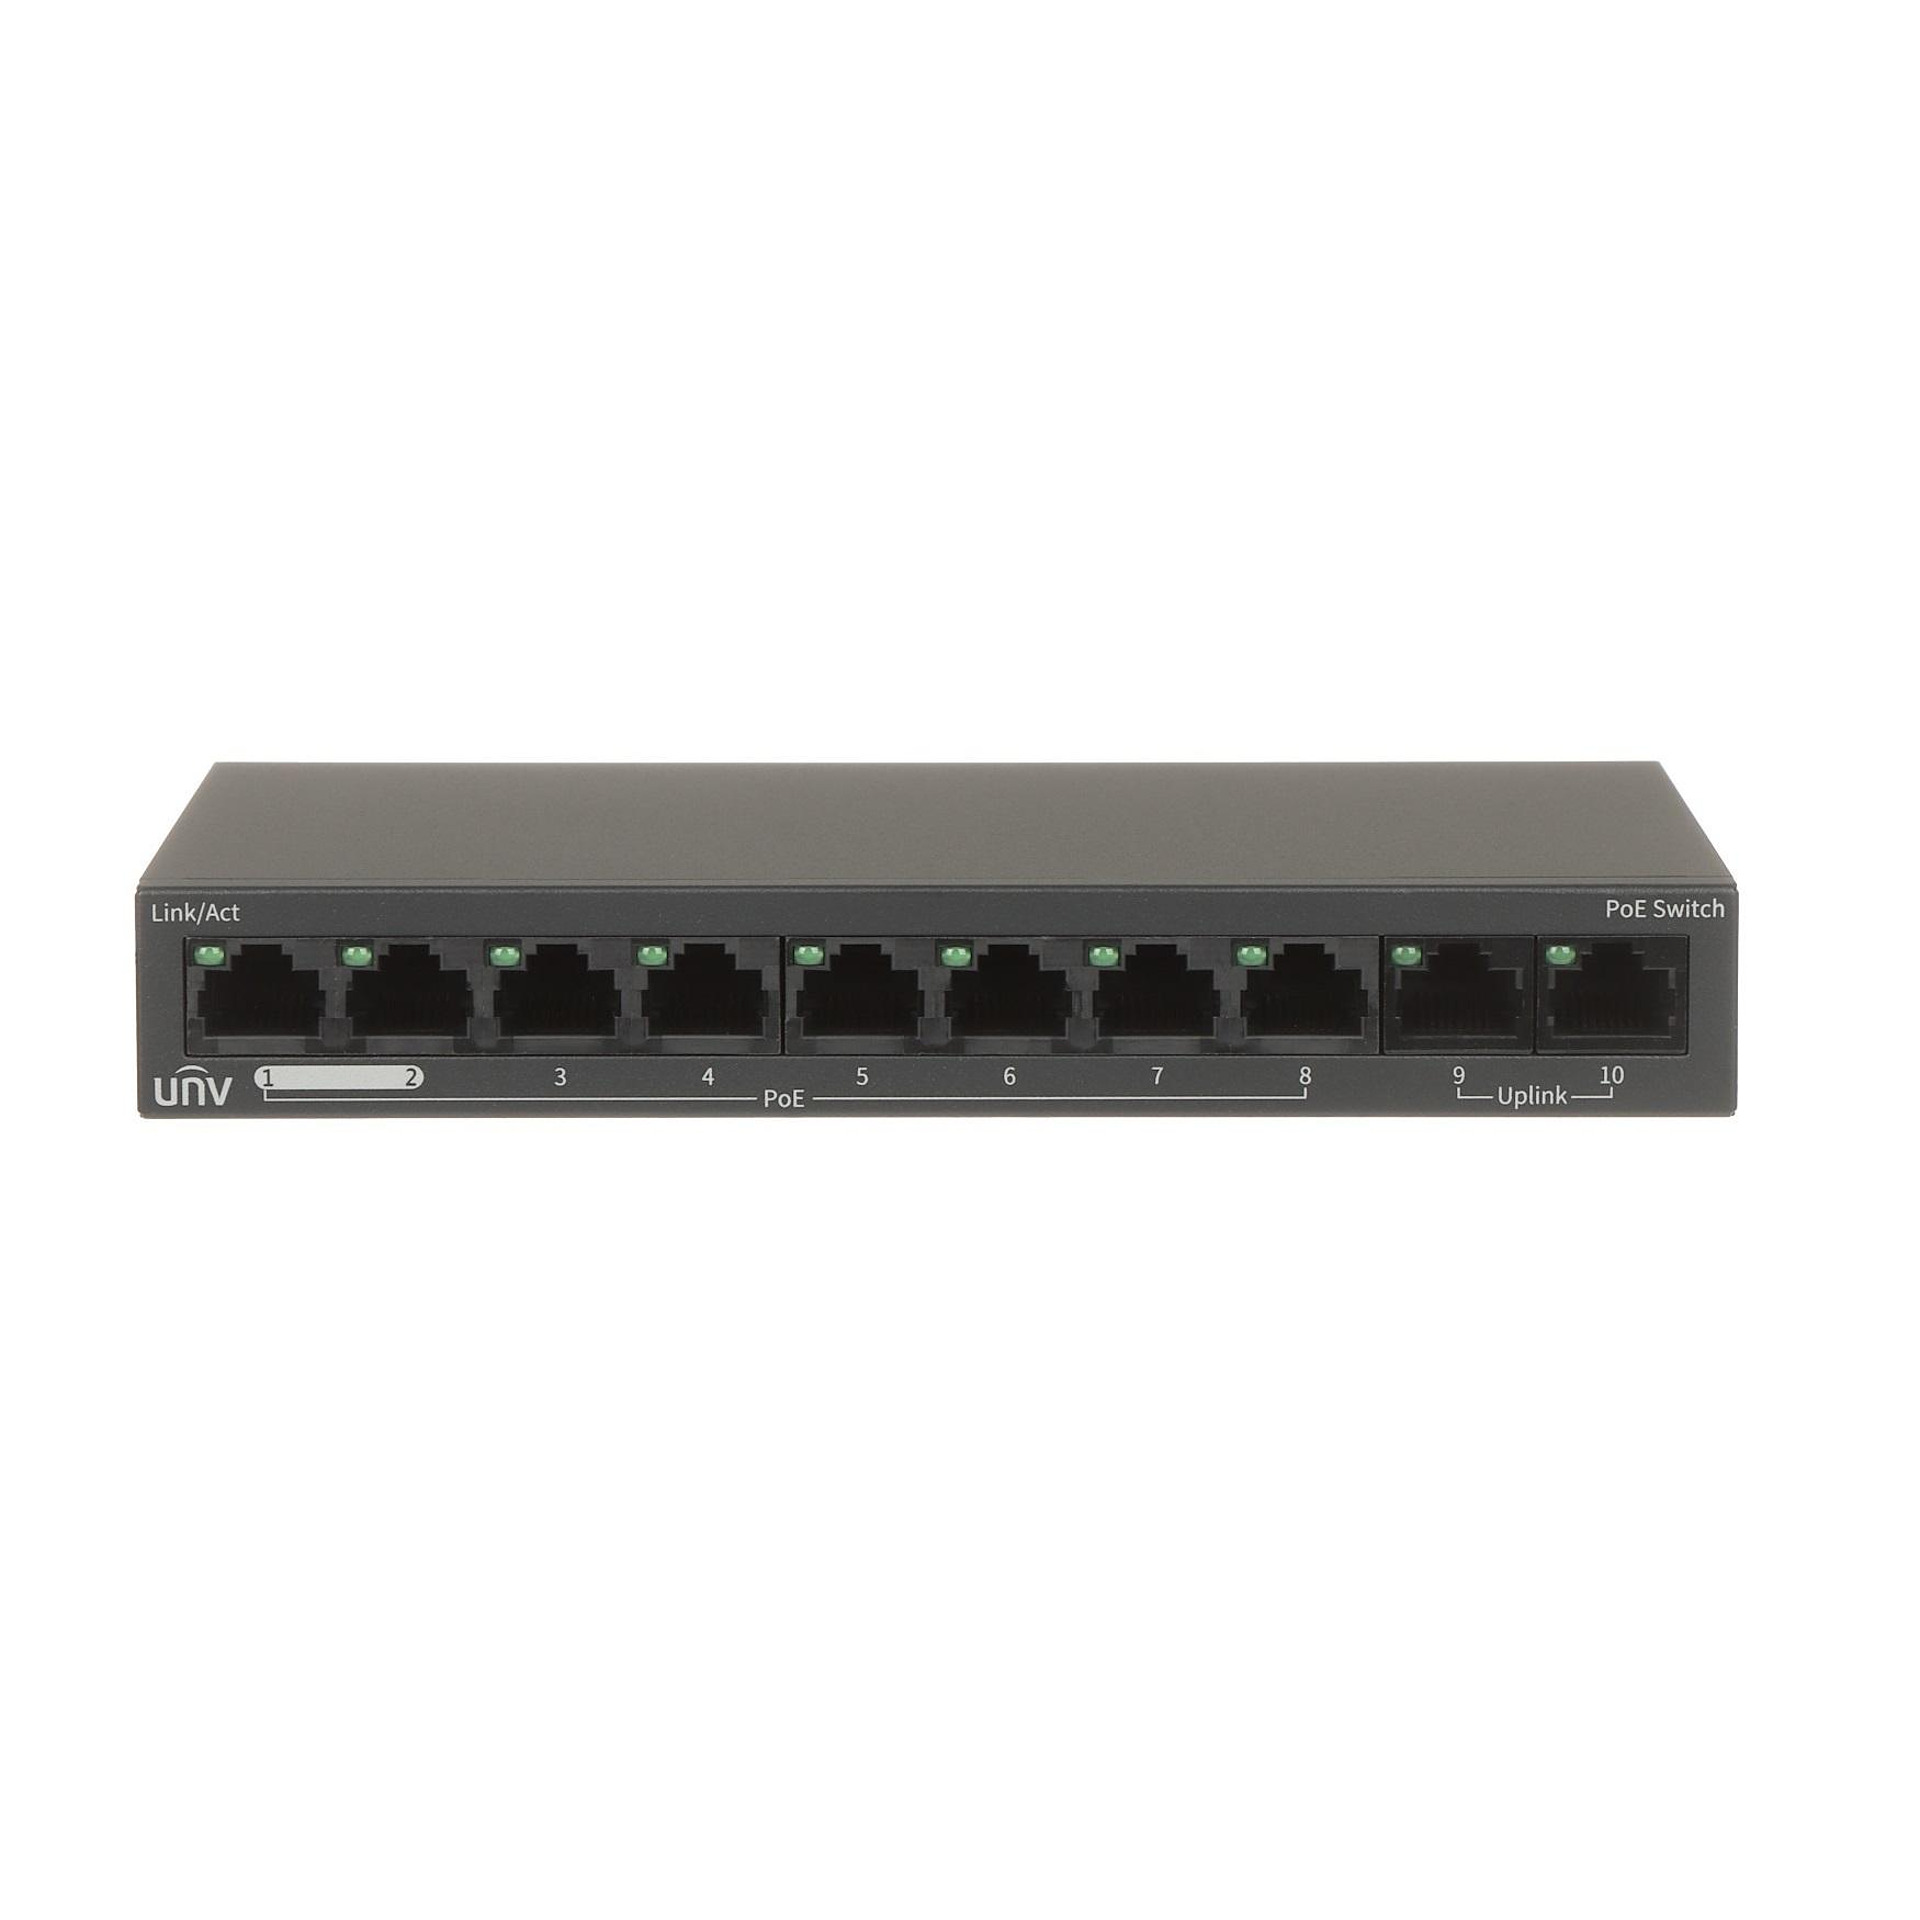 NSW2020-10T-POE-IN – dhvision